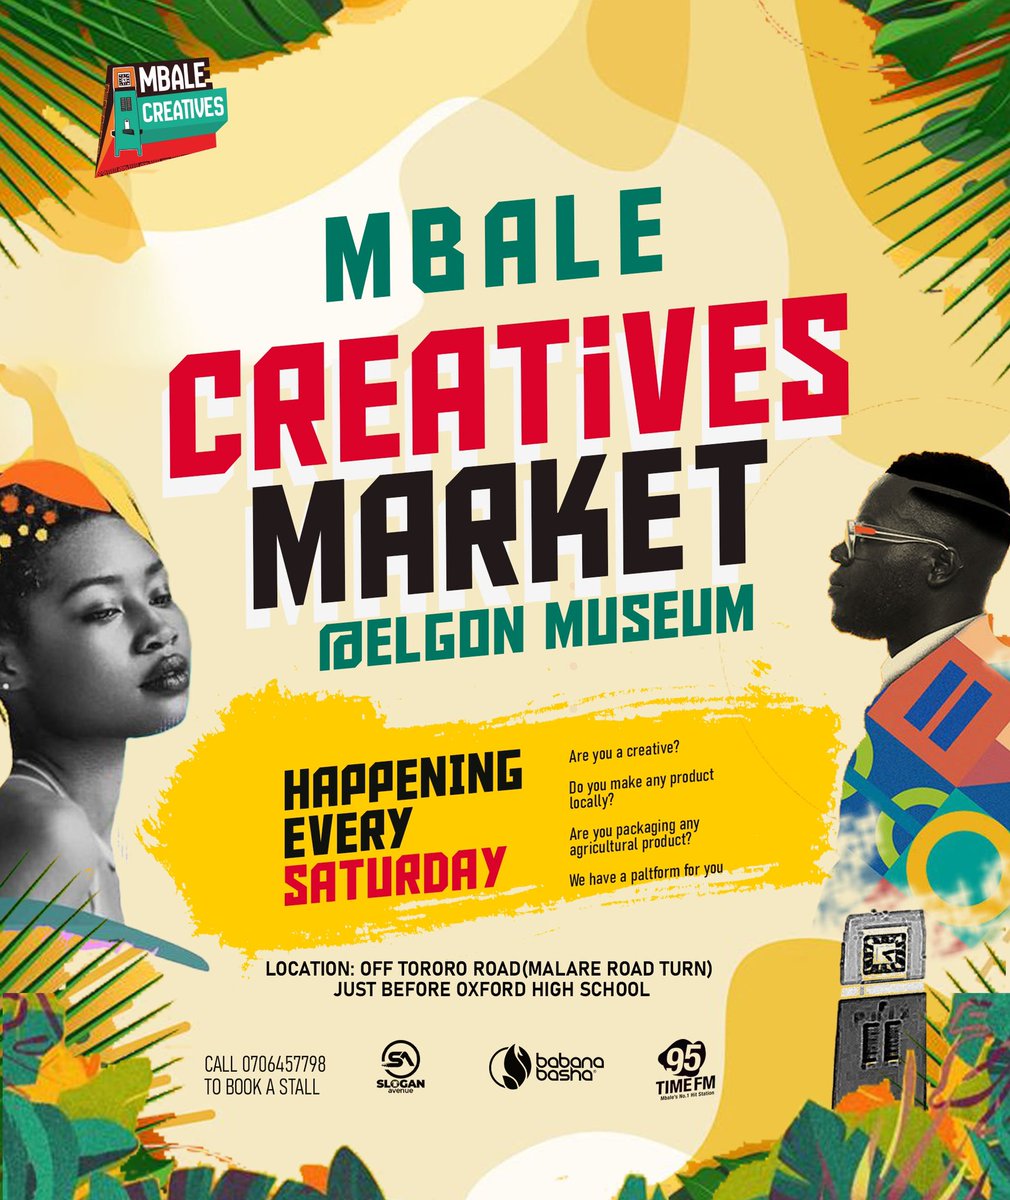 Its the Mbale Creatives Market day💃 Do you need coffee, jewelry for yourself, or arts and crafts for your living space? Visit us at the Elgon Museum every Saturday from 10am to late and shop from local makers!